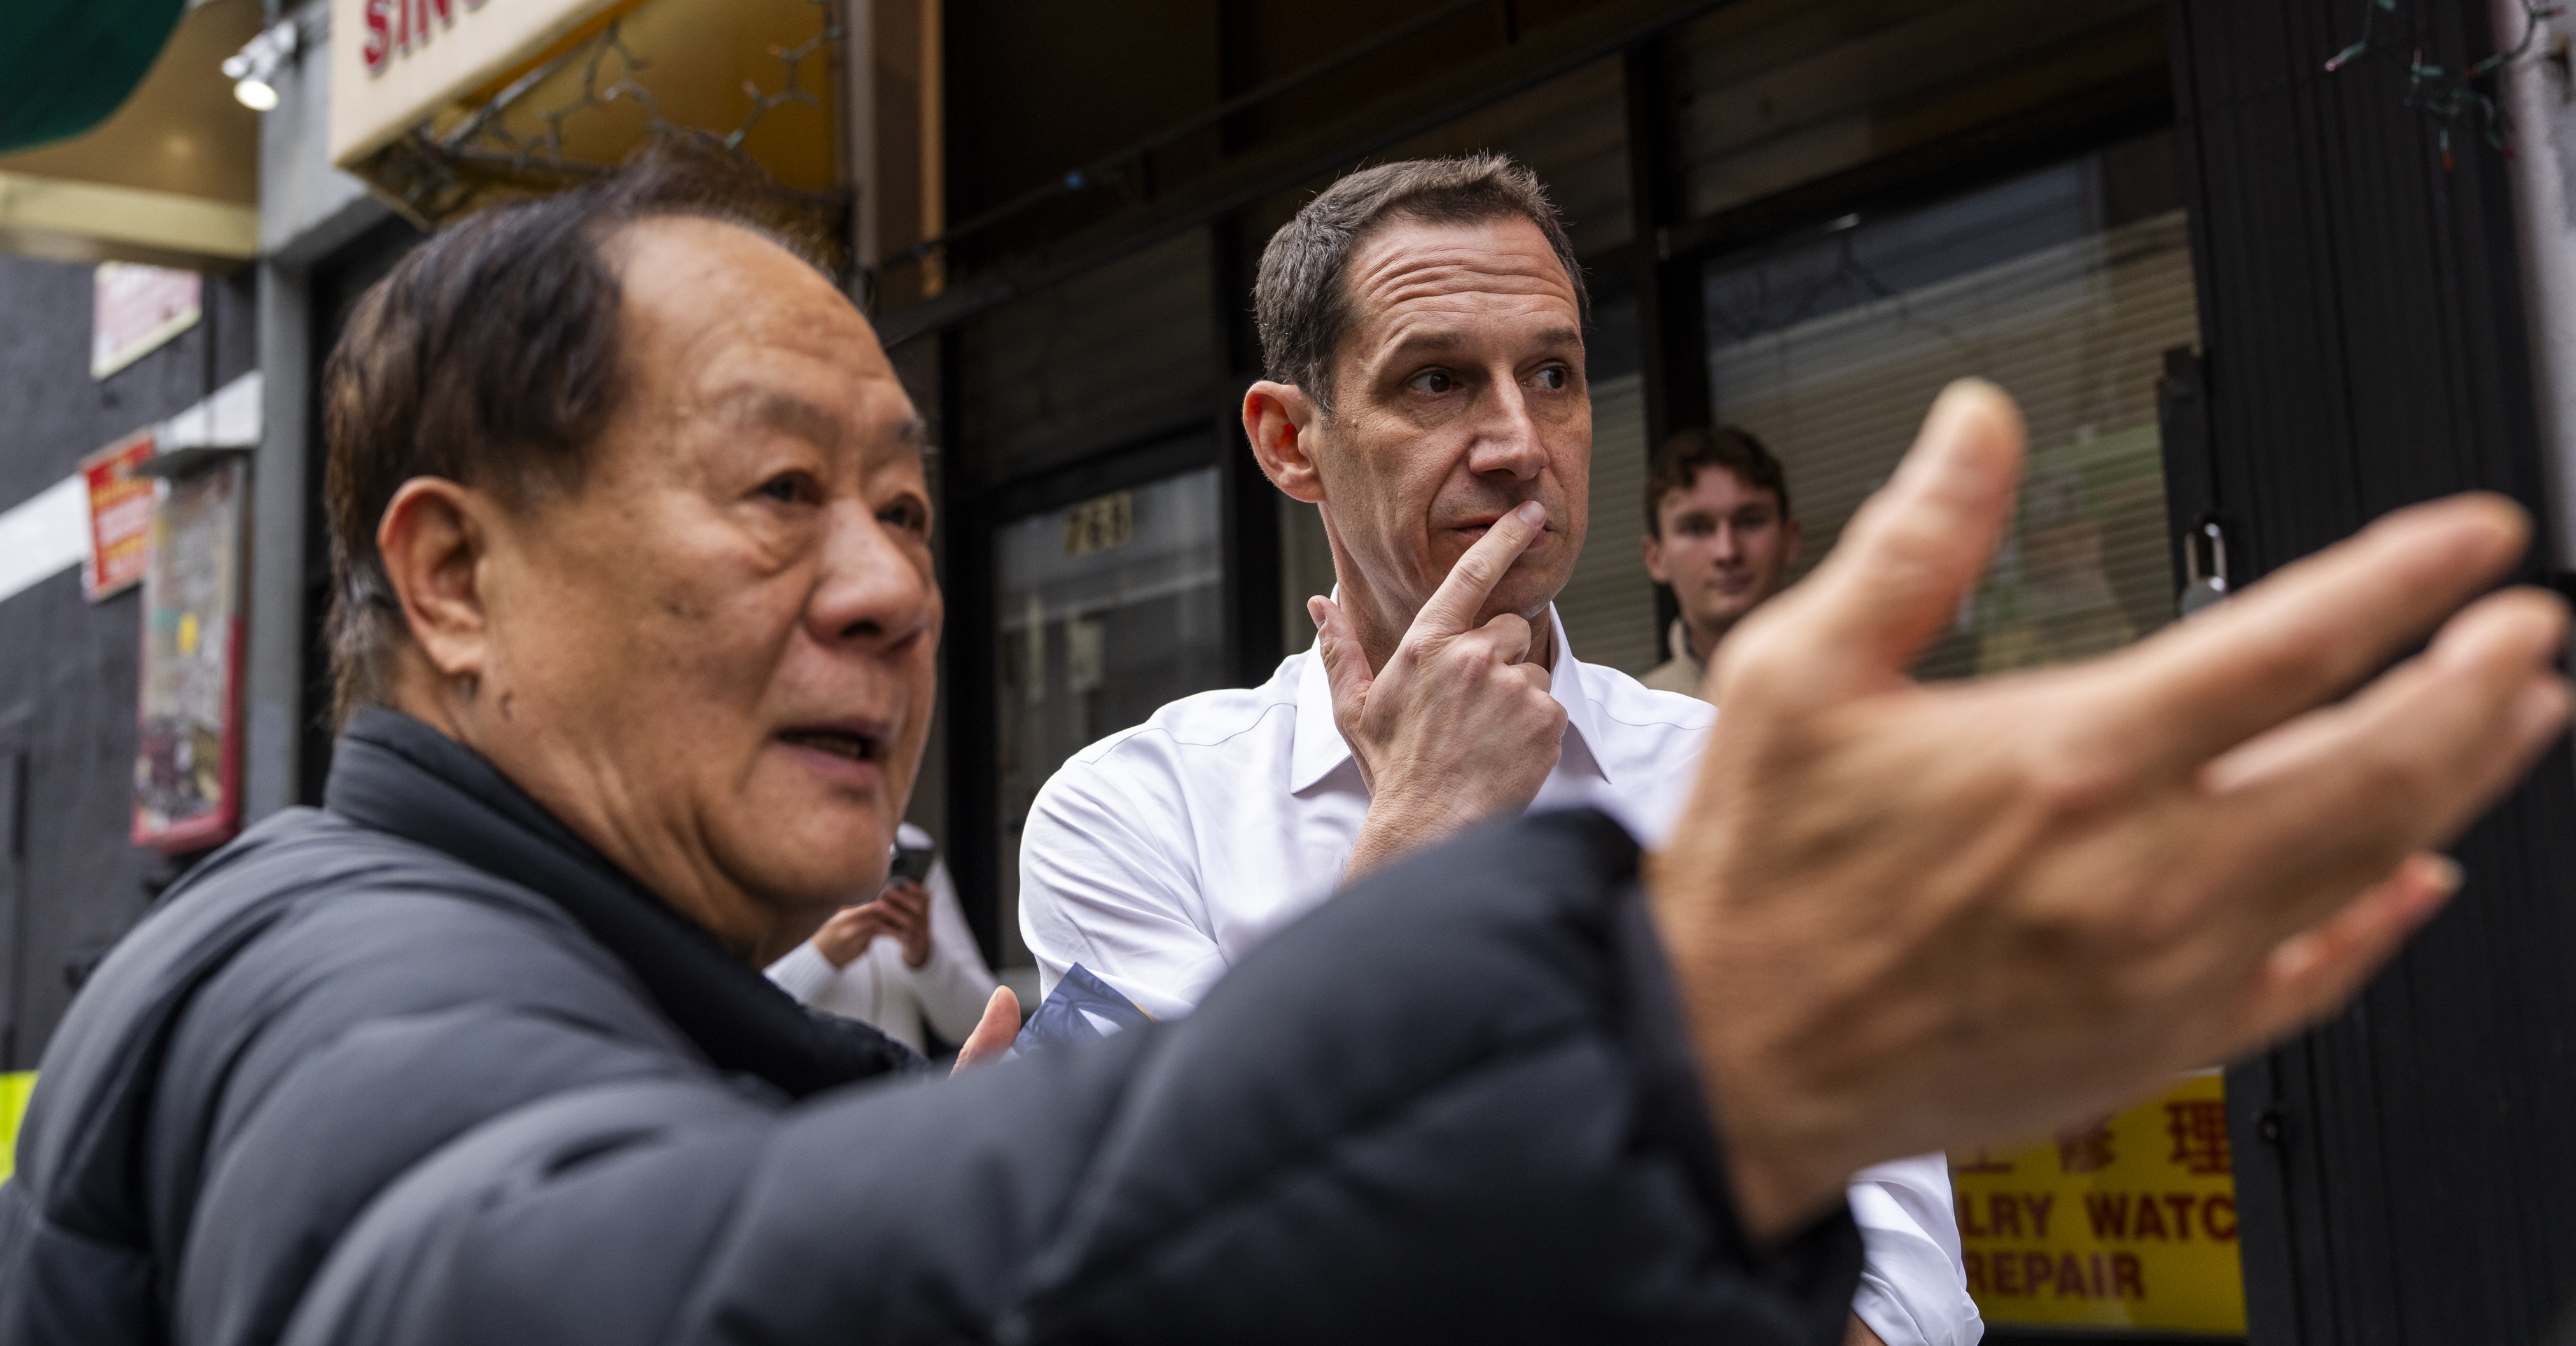 Daniel Lurie talks to an Asian man as they look down the street in San Francisco's Chinatown.